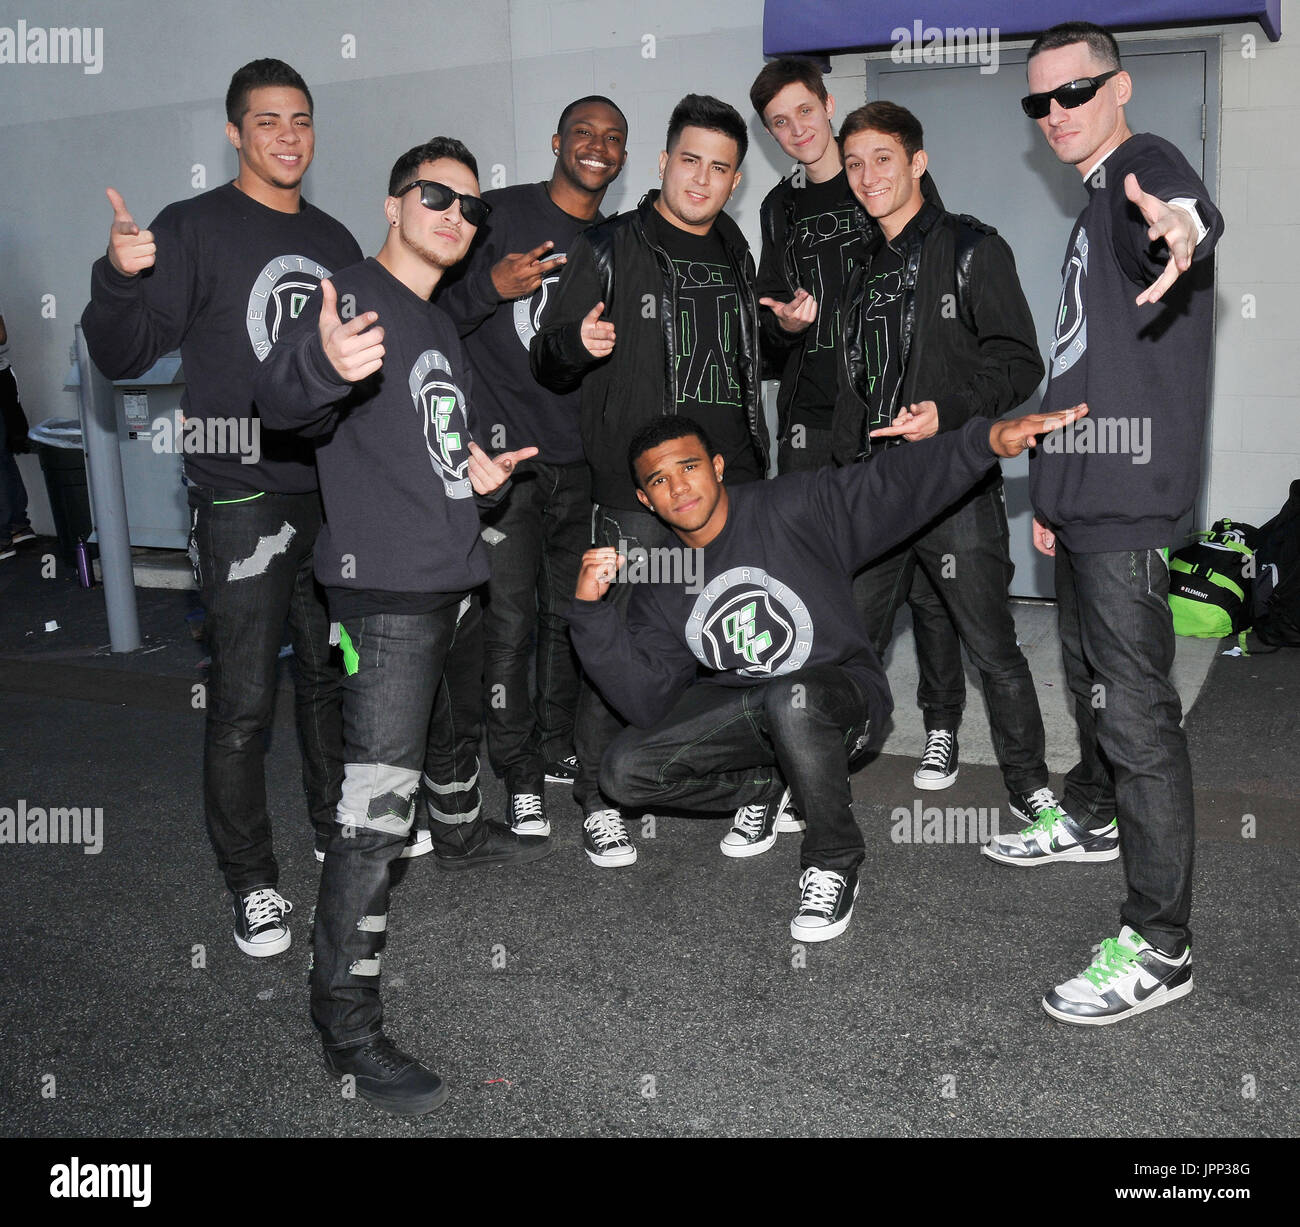 Elektrolytes from Arizona at Randy Jackson's America's Best Dance Crew Season 7 Season Of The Superstars - Los Angeles Auditions at Center Staging in Burbank, CA. The event took place on Saturday, January 28, 2012. Photo by Sthanlee B. Mirador Pacific Rim Photo Press. Stock Photo